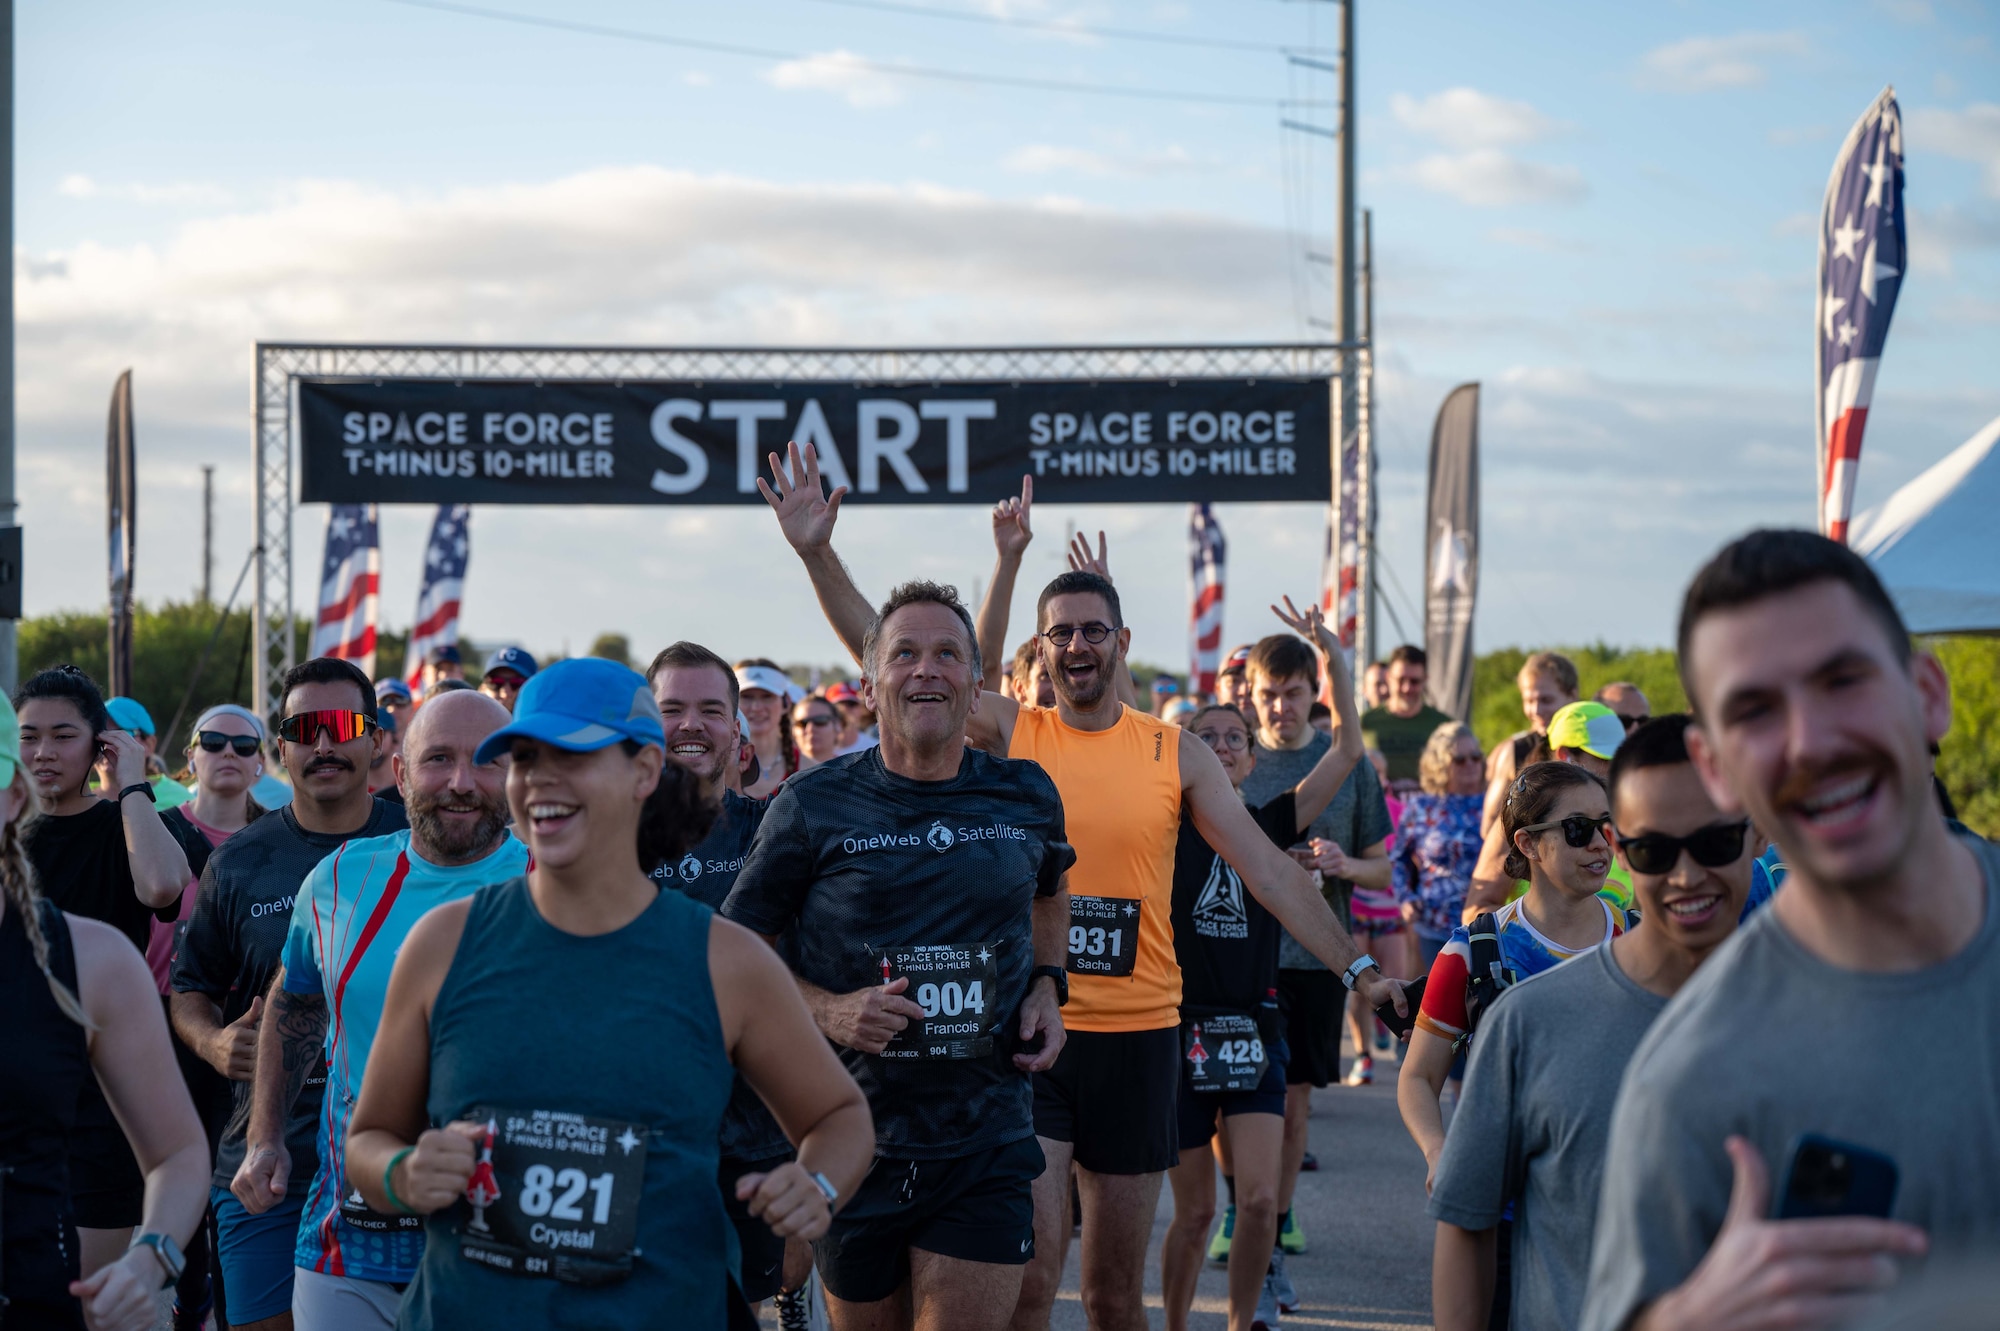 Participants cross the start line at the T-Minus 10-Miler at Cape Canaveral Space Force Station, Florida, Dec. 9, 2023. The T-Minus 10-Miler celebrates the Space Forces birthday. (U.S. Space Force photo by Senior Airman Samuel Becker)